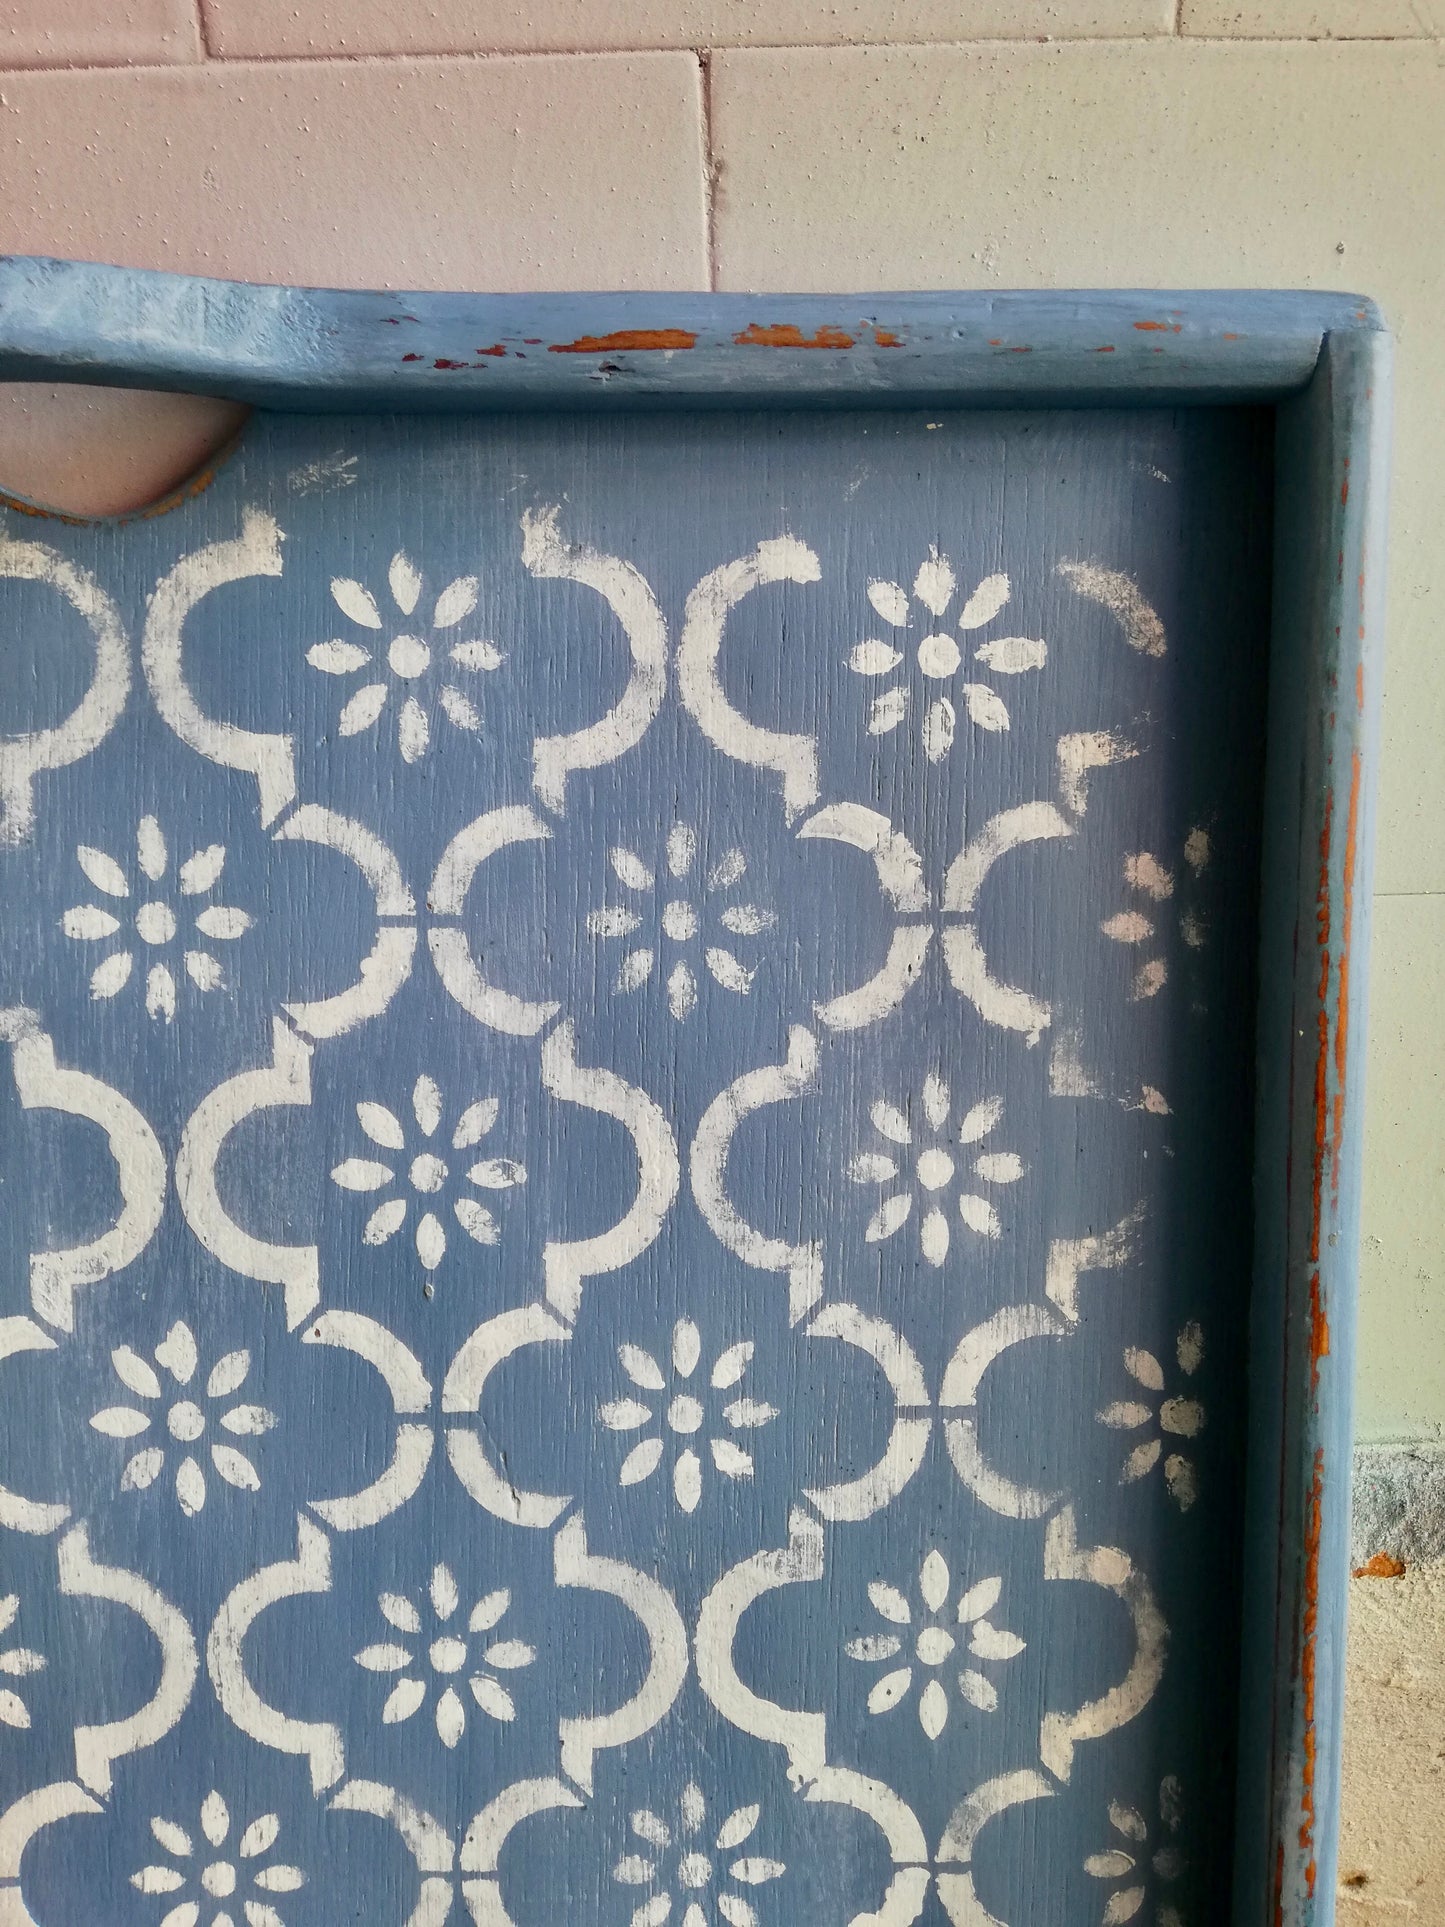 Big solid wooden serving tray hand painted in blue and white